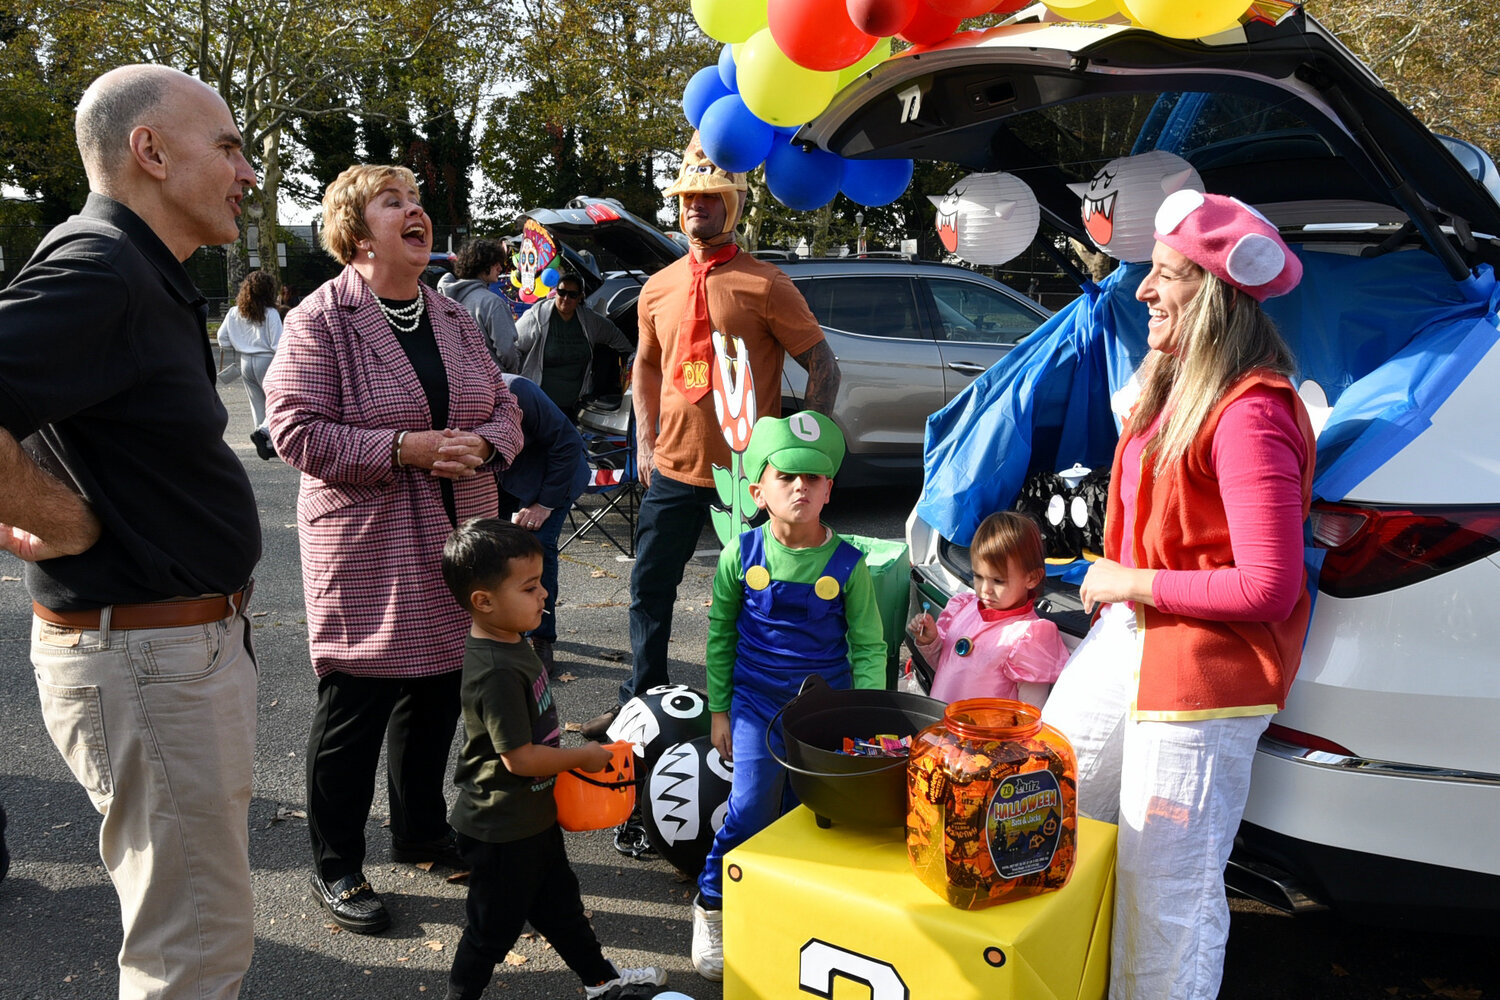 John Giuffré, county legislator, Kate Murray, town clerk, and Thomas Muscarella, town councilman, chatted with the Giammarco family at the Nov. 5 trunk-or-treat in Franklin Square.